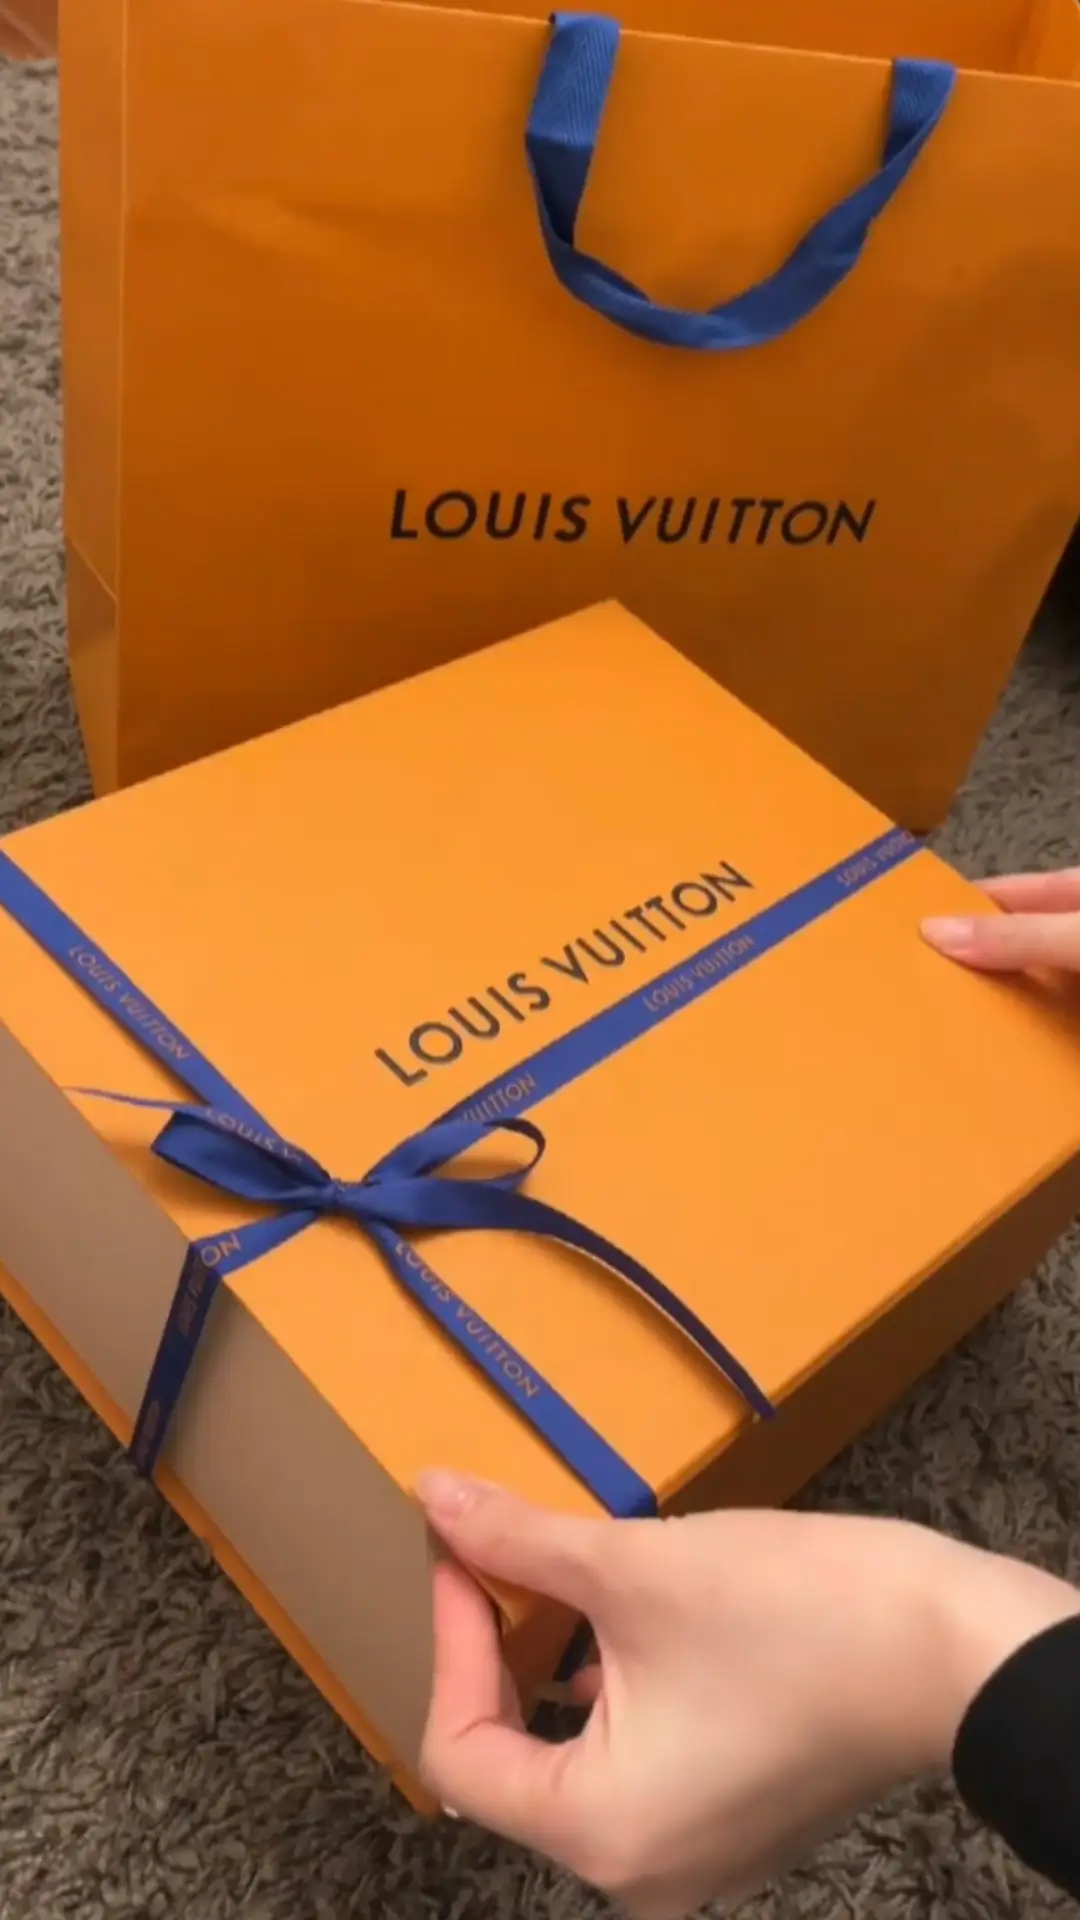 Louis Vuitton LV EMPTY Box & Paper Bag ( PAPER BAG/BOX ONLY NOTHING  INSIDE)